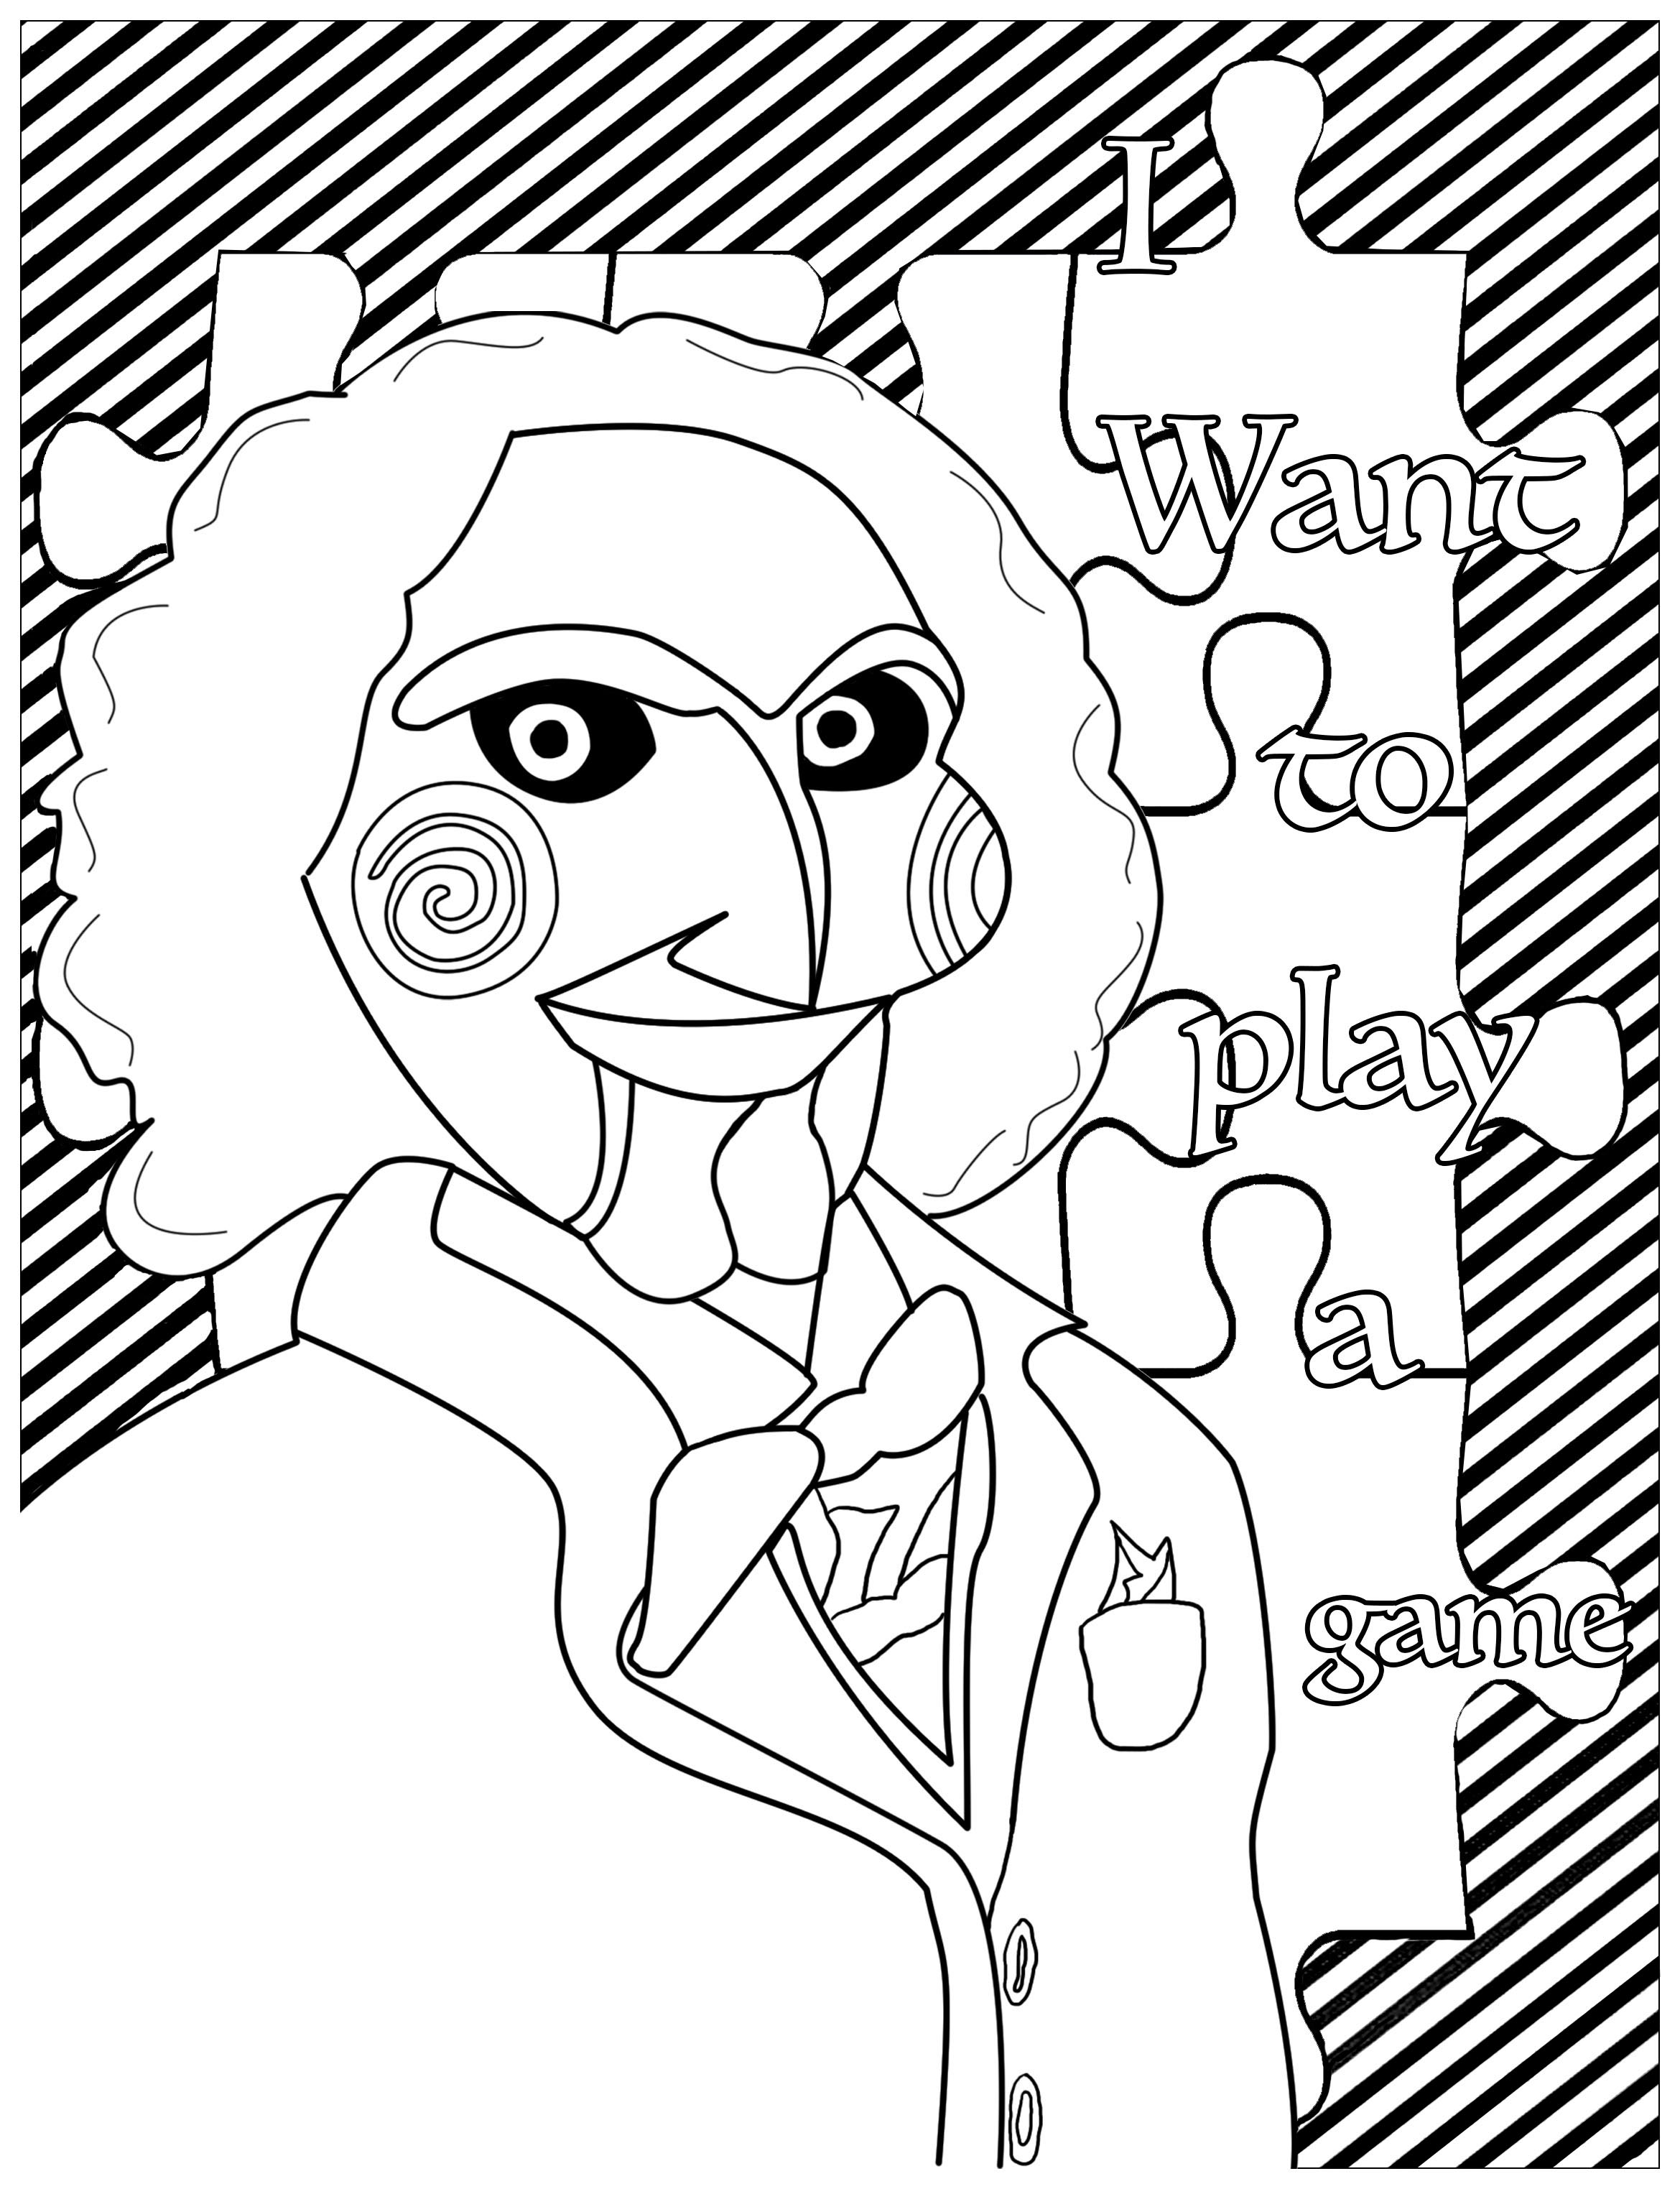 Jigsaw billy the puppet saw Halloween Adult Coloring Pages